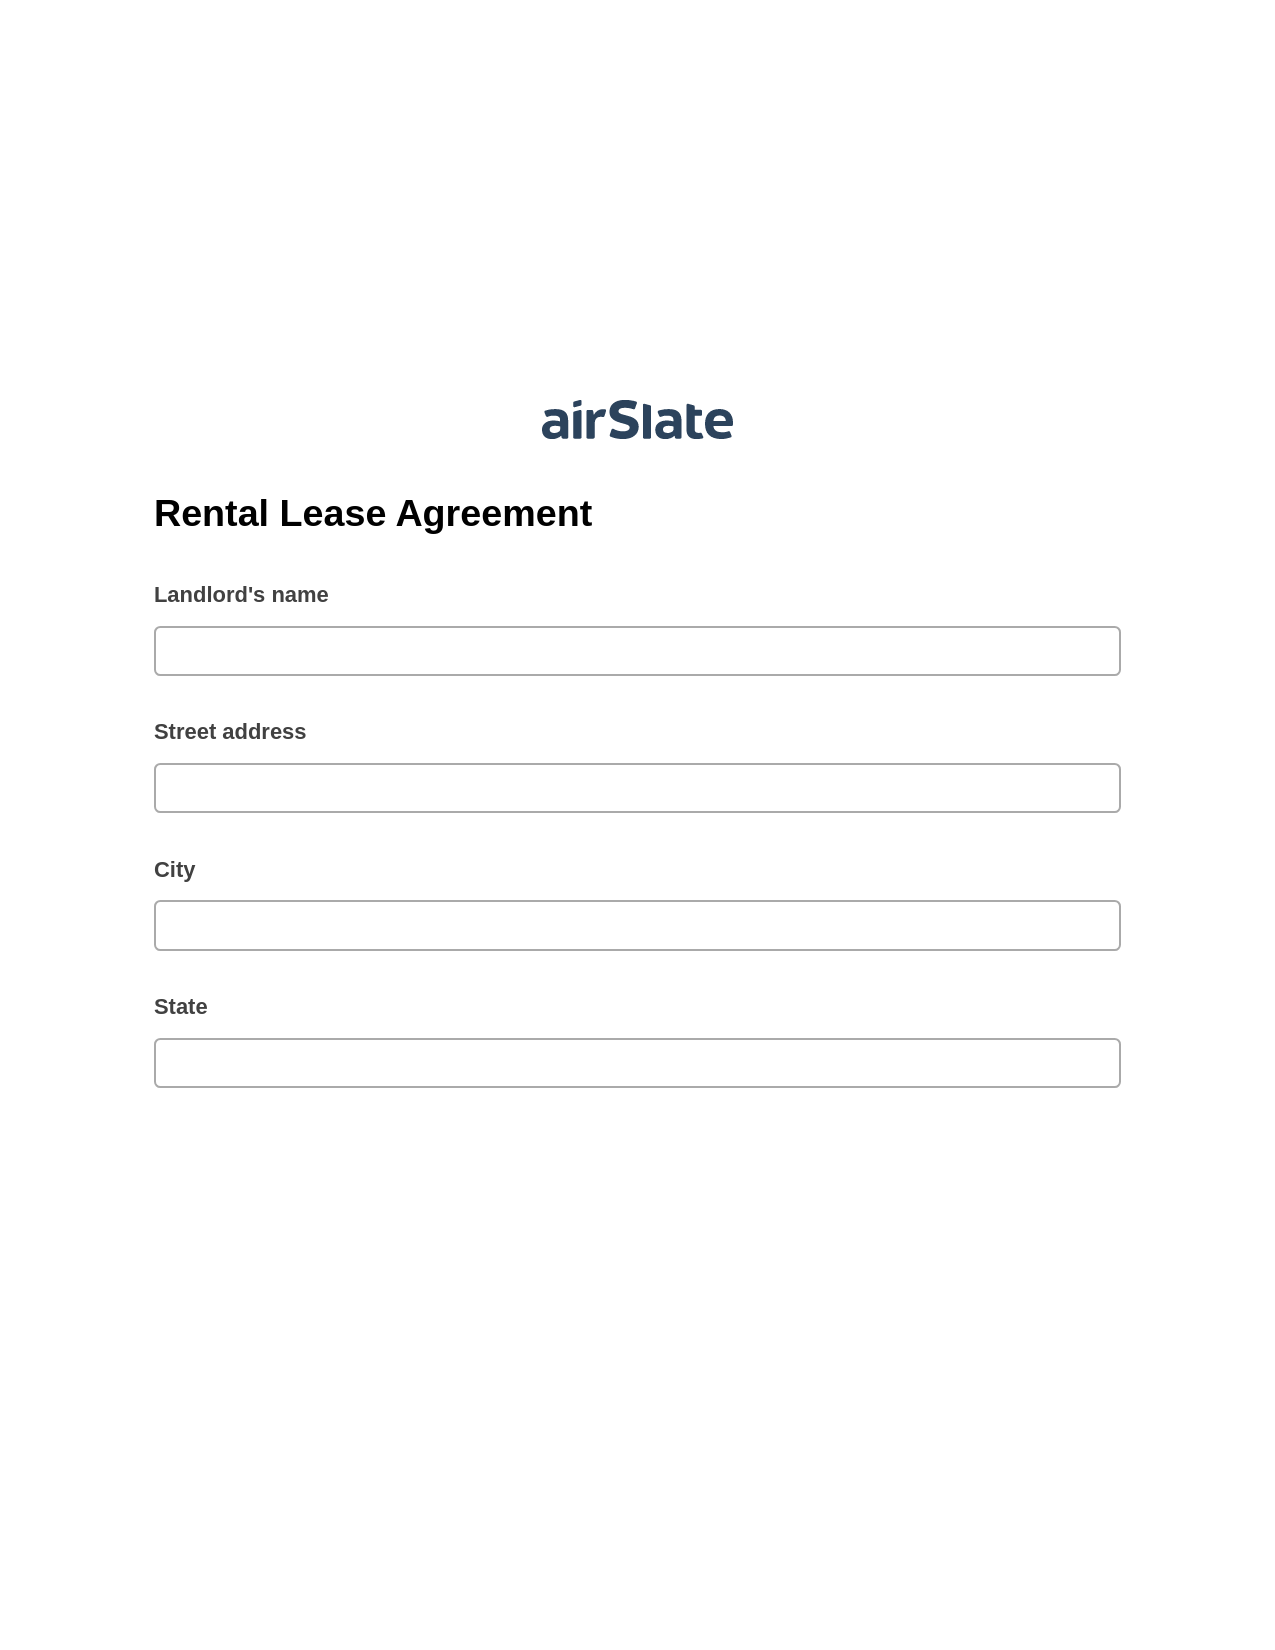 Rental Lease Agreement Pre-fill Dropdown from Airtable, Create Slate every Google Sheet Update Bot, Archive to SharePoint Folder Bot